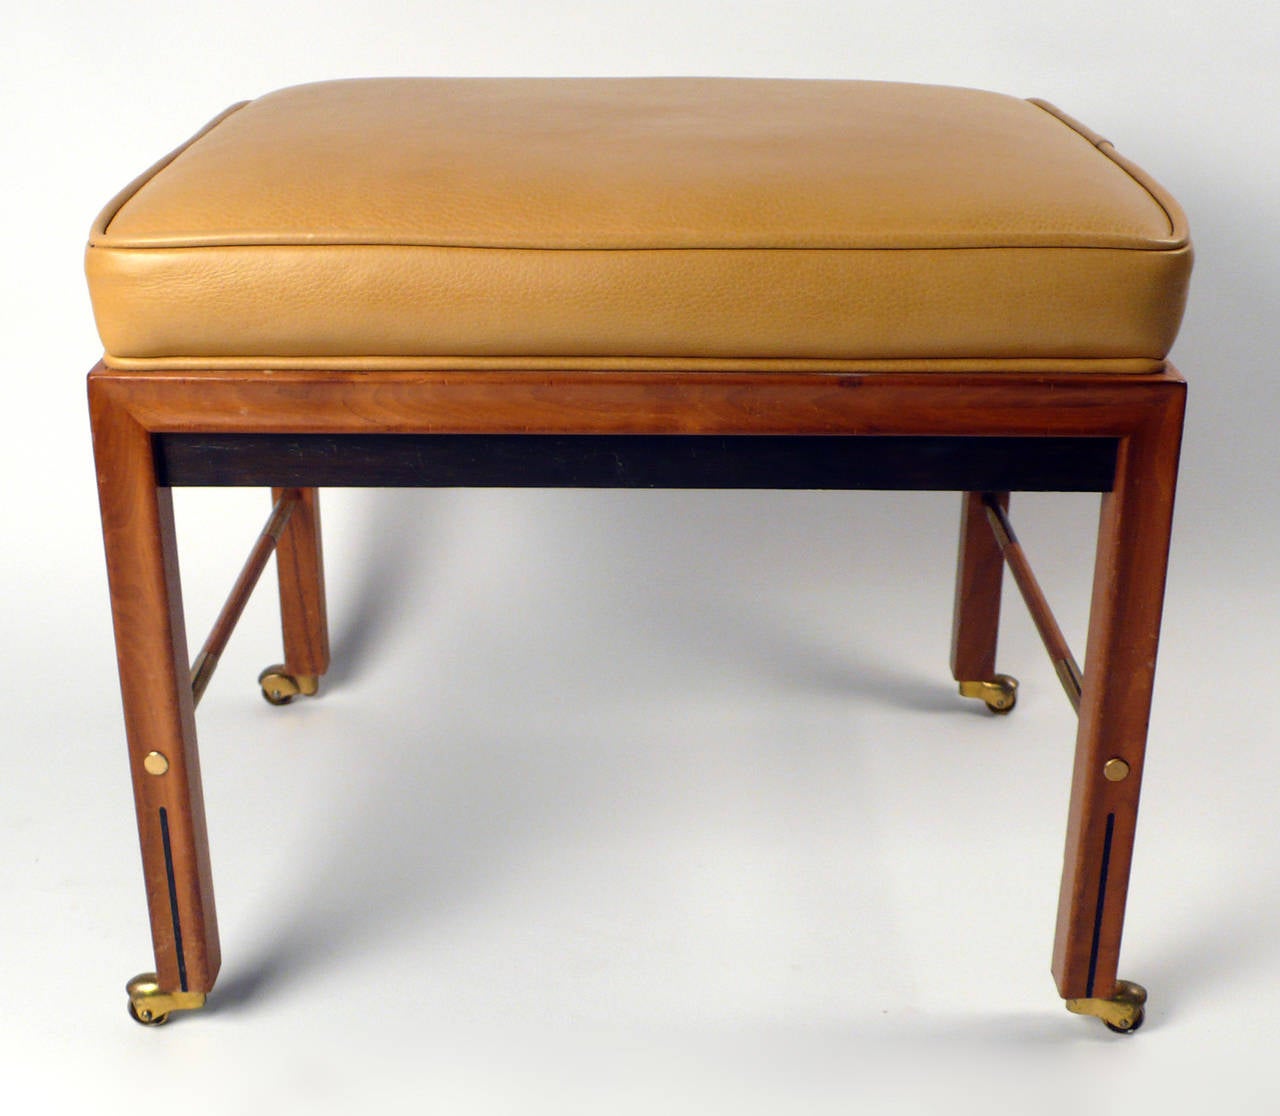 Leather stool with brass castors and inset detailing.